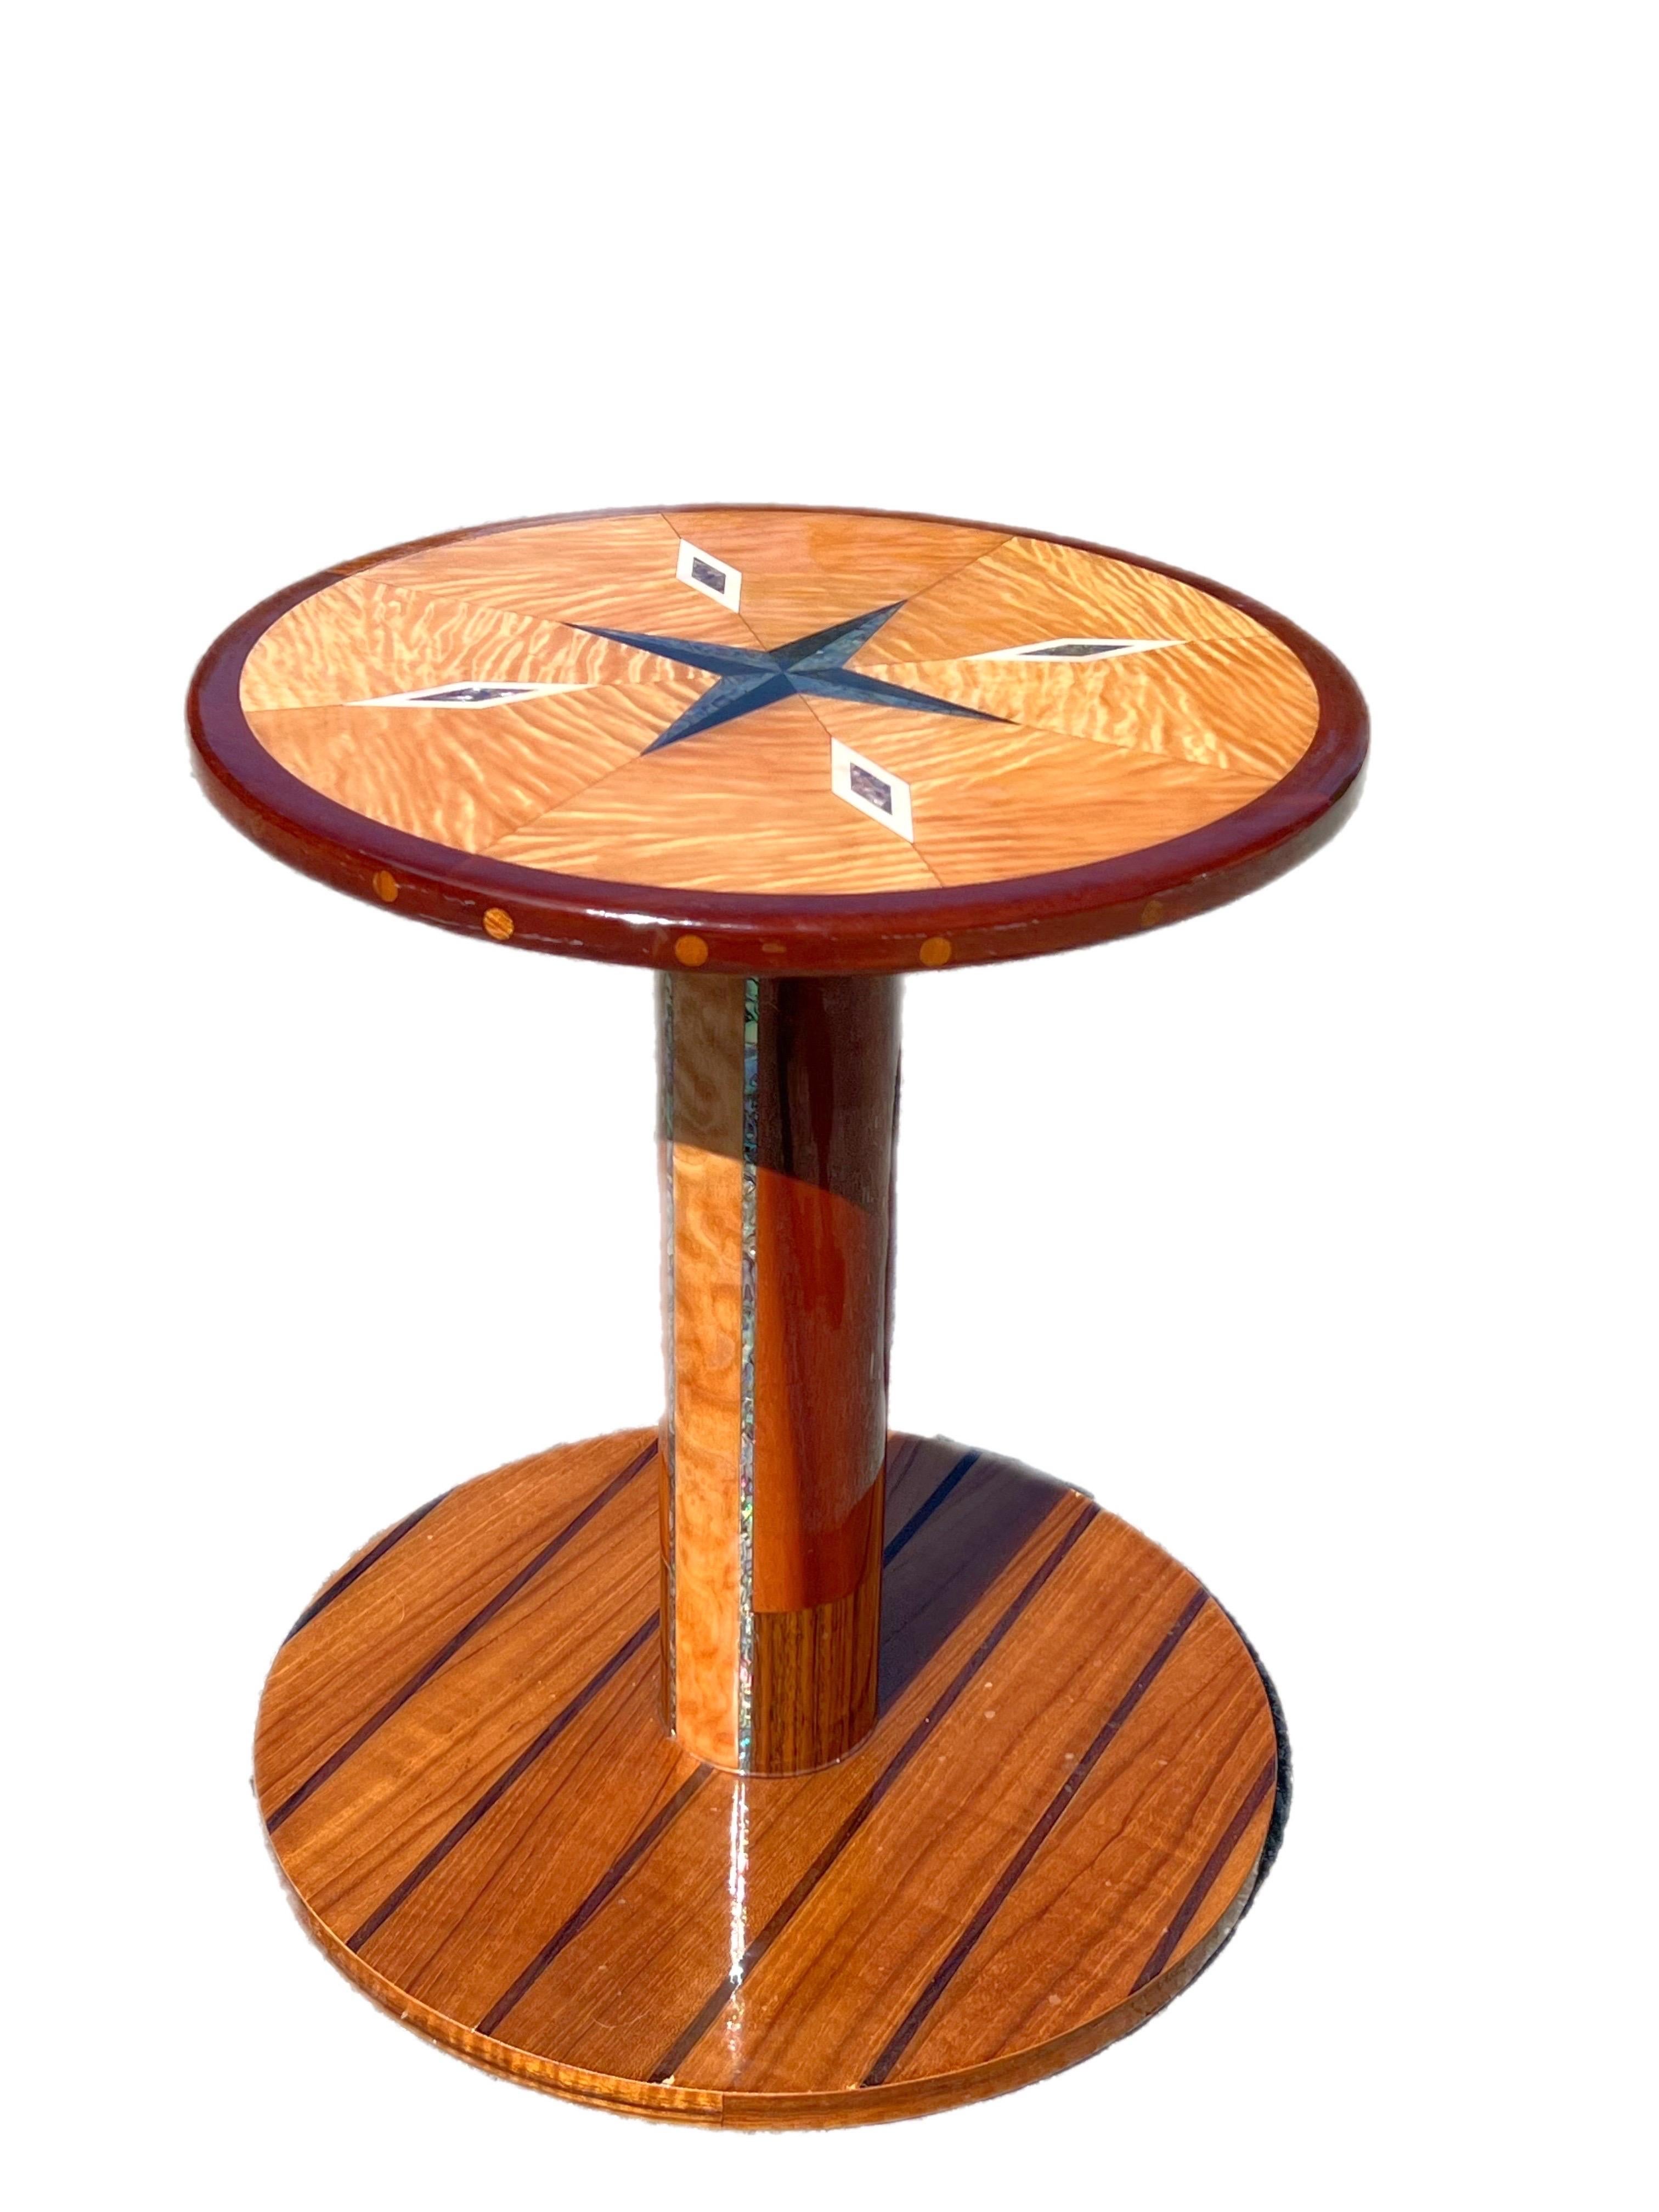 Artisan Crafted Specimen Compass Table
A stunning table inlaid with abalone shell, mother of pearl, and marble to form a compass rose on the table top.  Satin wood and teak, zebra wood and other exotic wood compromises the table.   The table has a